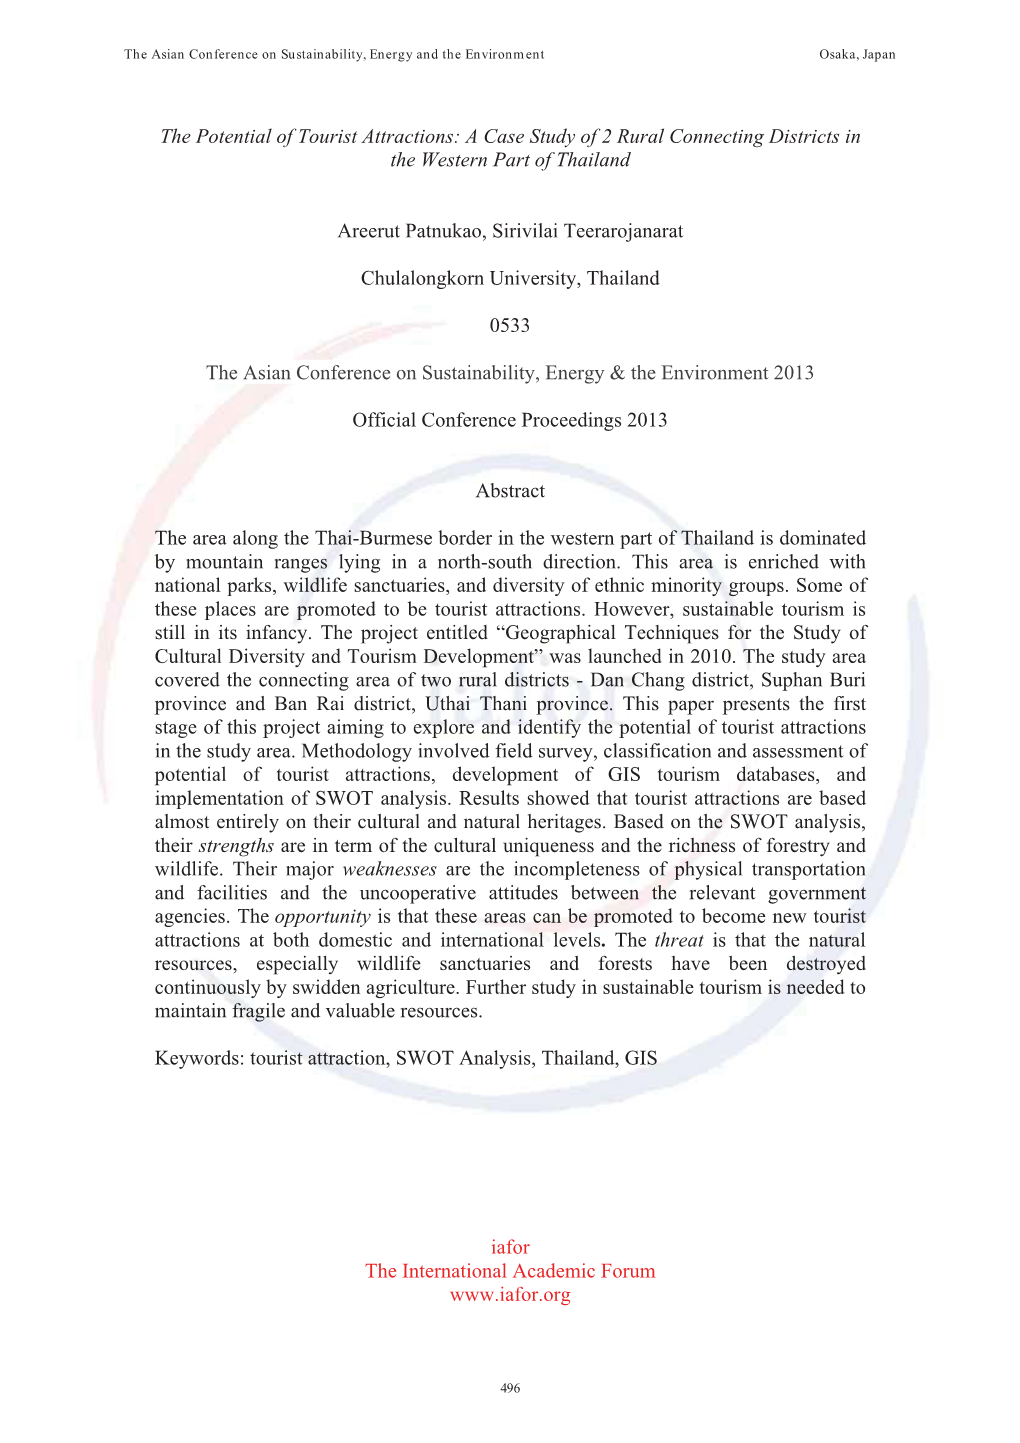 The Potential of Tourist Attractions: a Case Study of 2 Rural Connecting Districts in the Western Part of Thailand